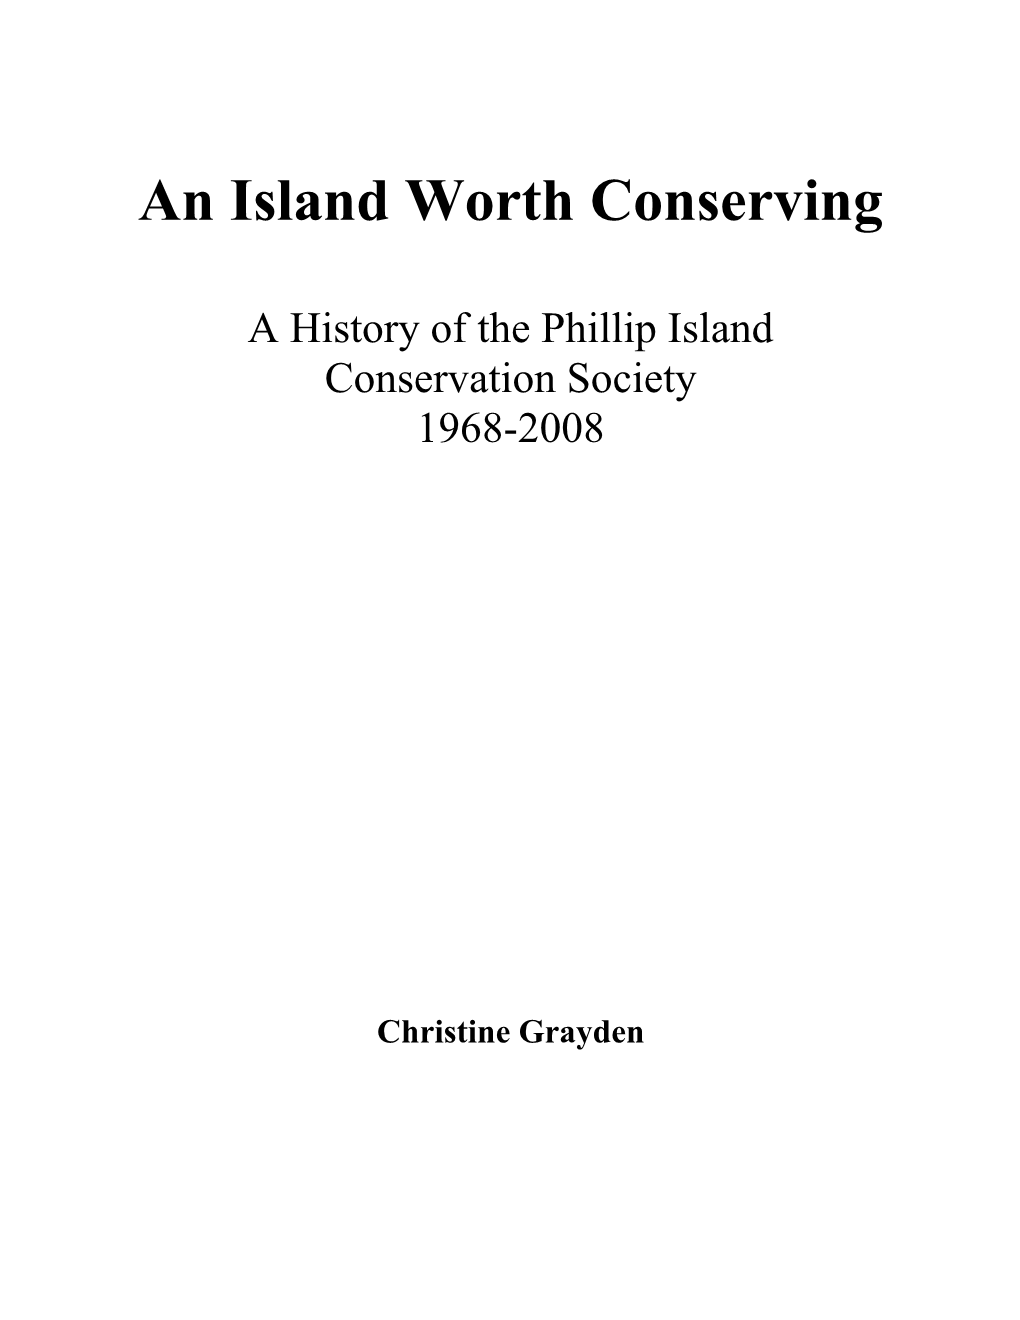 An Island Worth Conserving